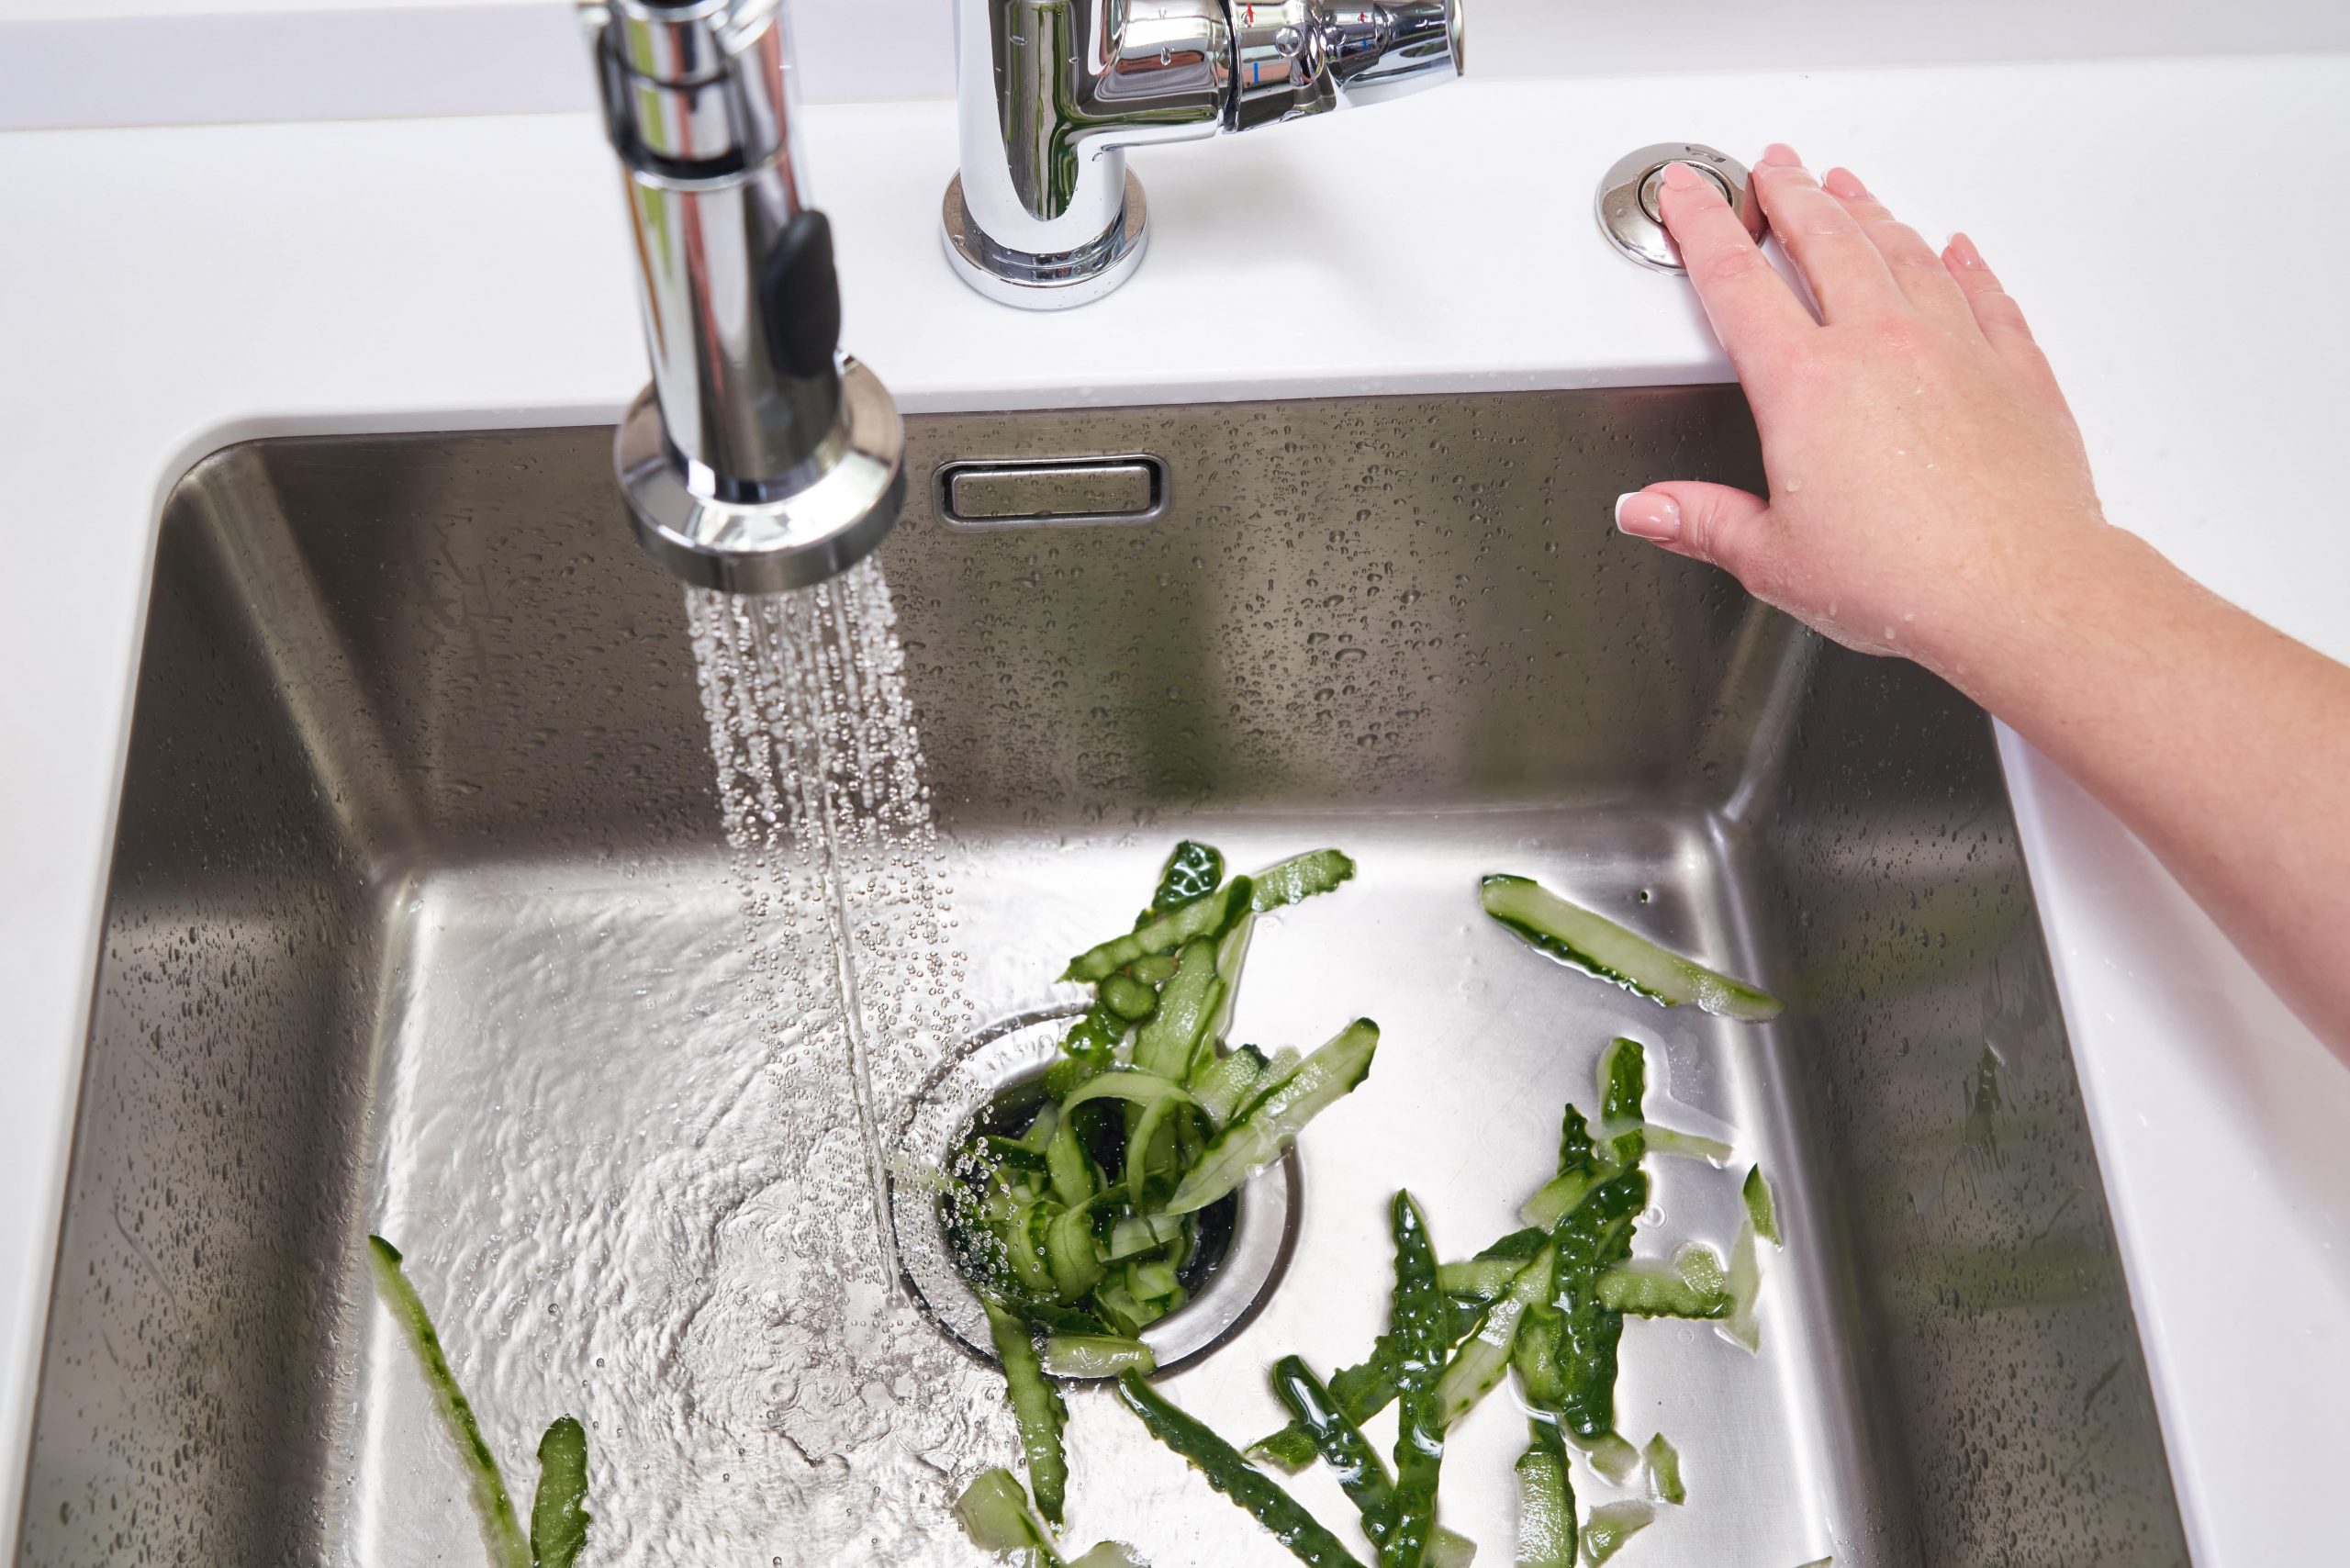 How To Care For Your Garbage Disposal